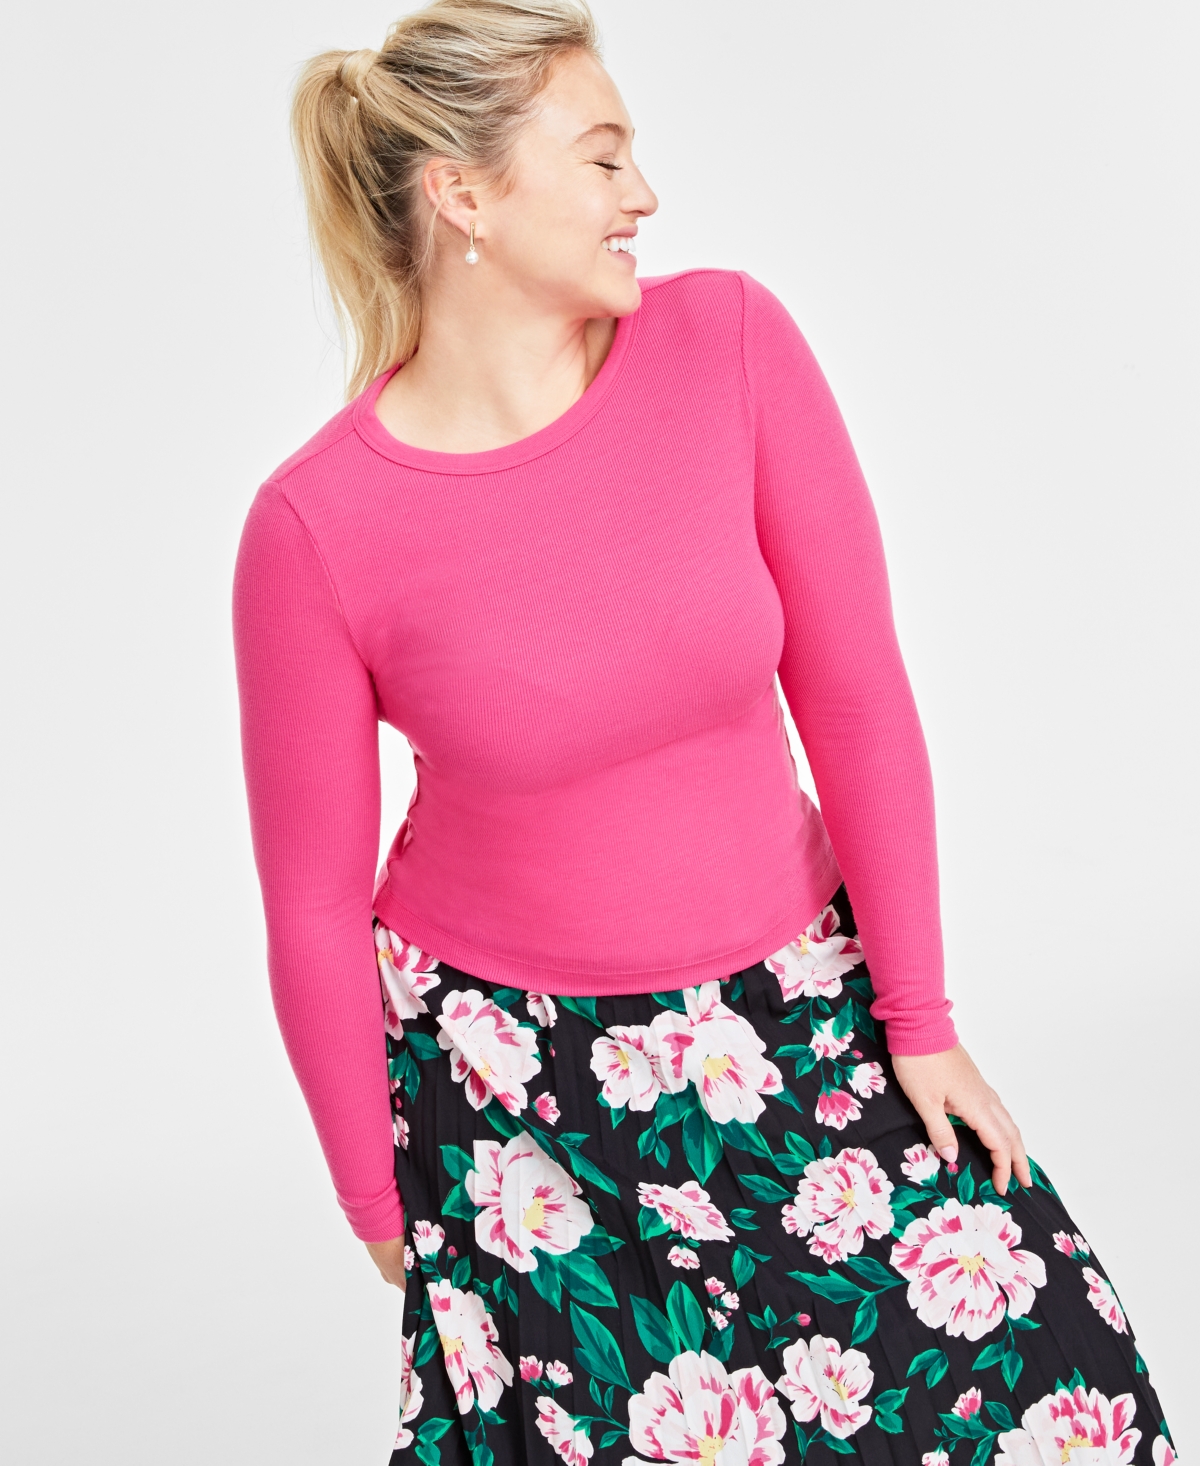 ON 34TH WOMEN'S RIBBED LONG-SLEEVE CREWNECK TOP, CREATED FOR MACY'S